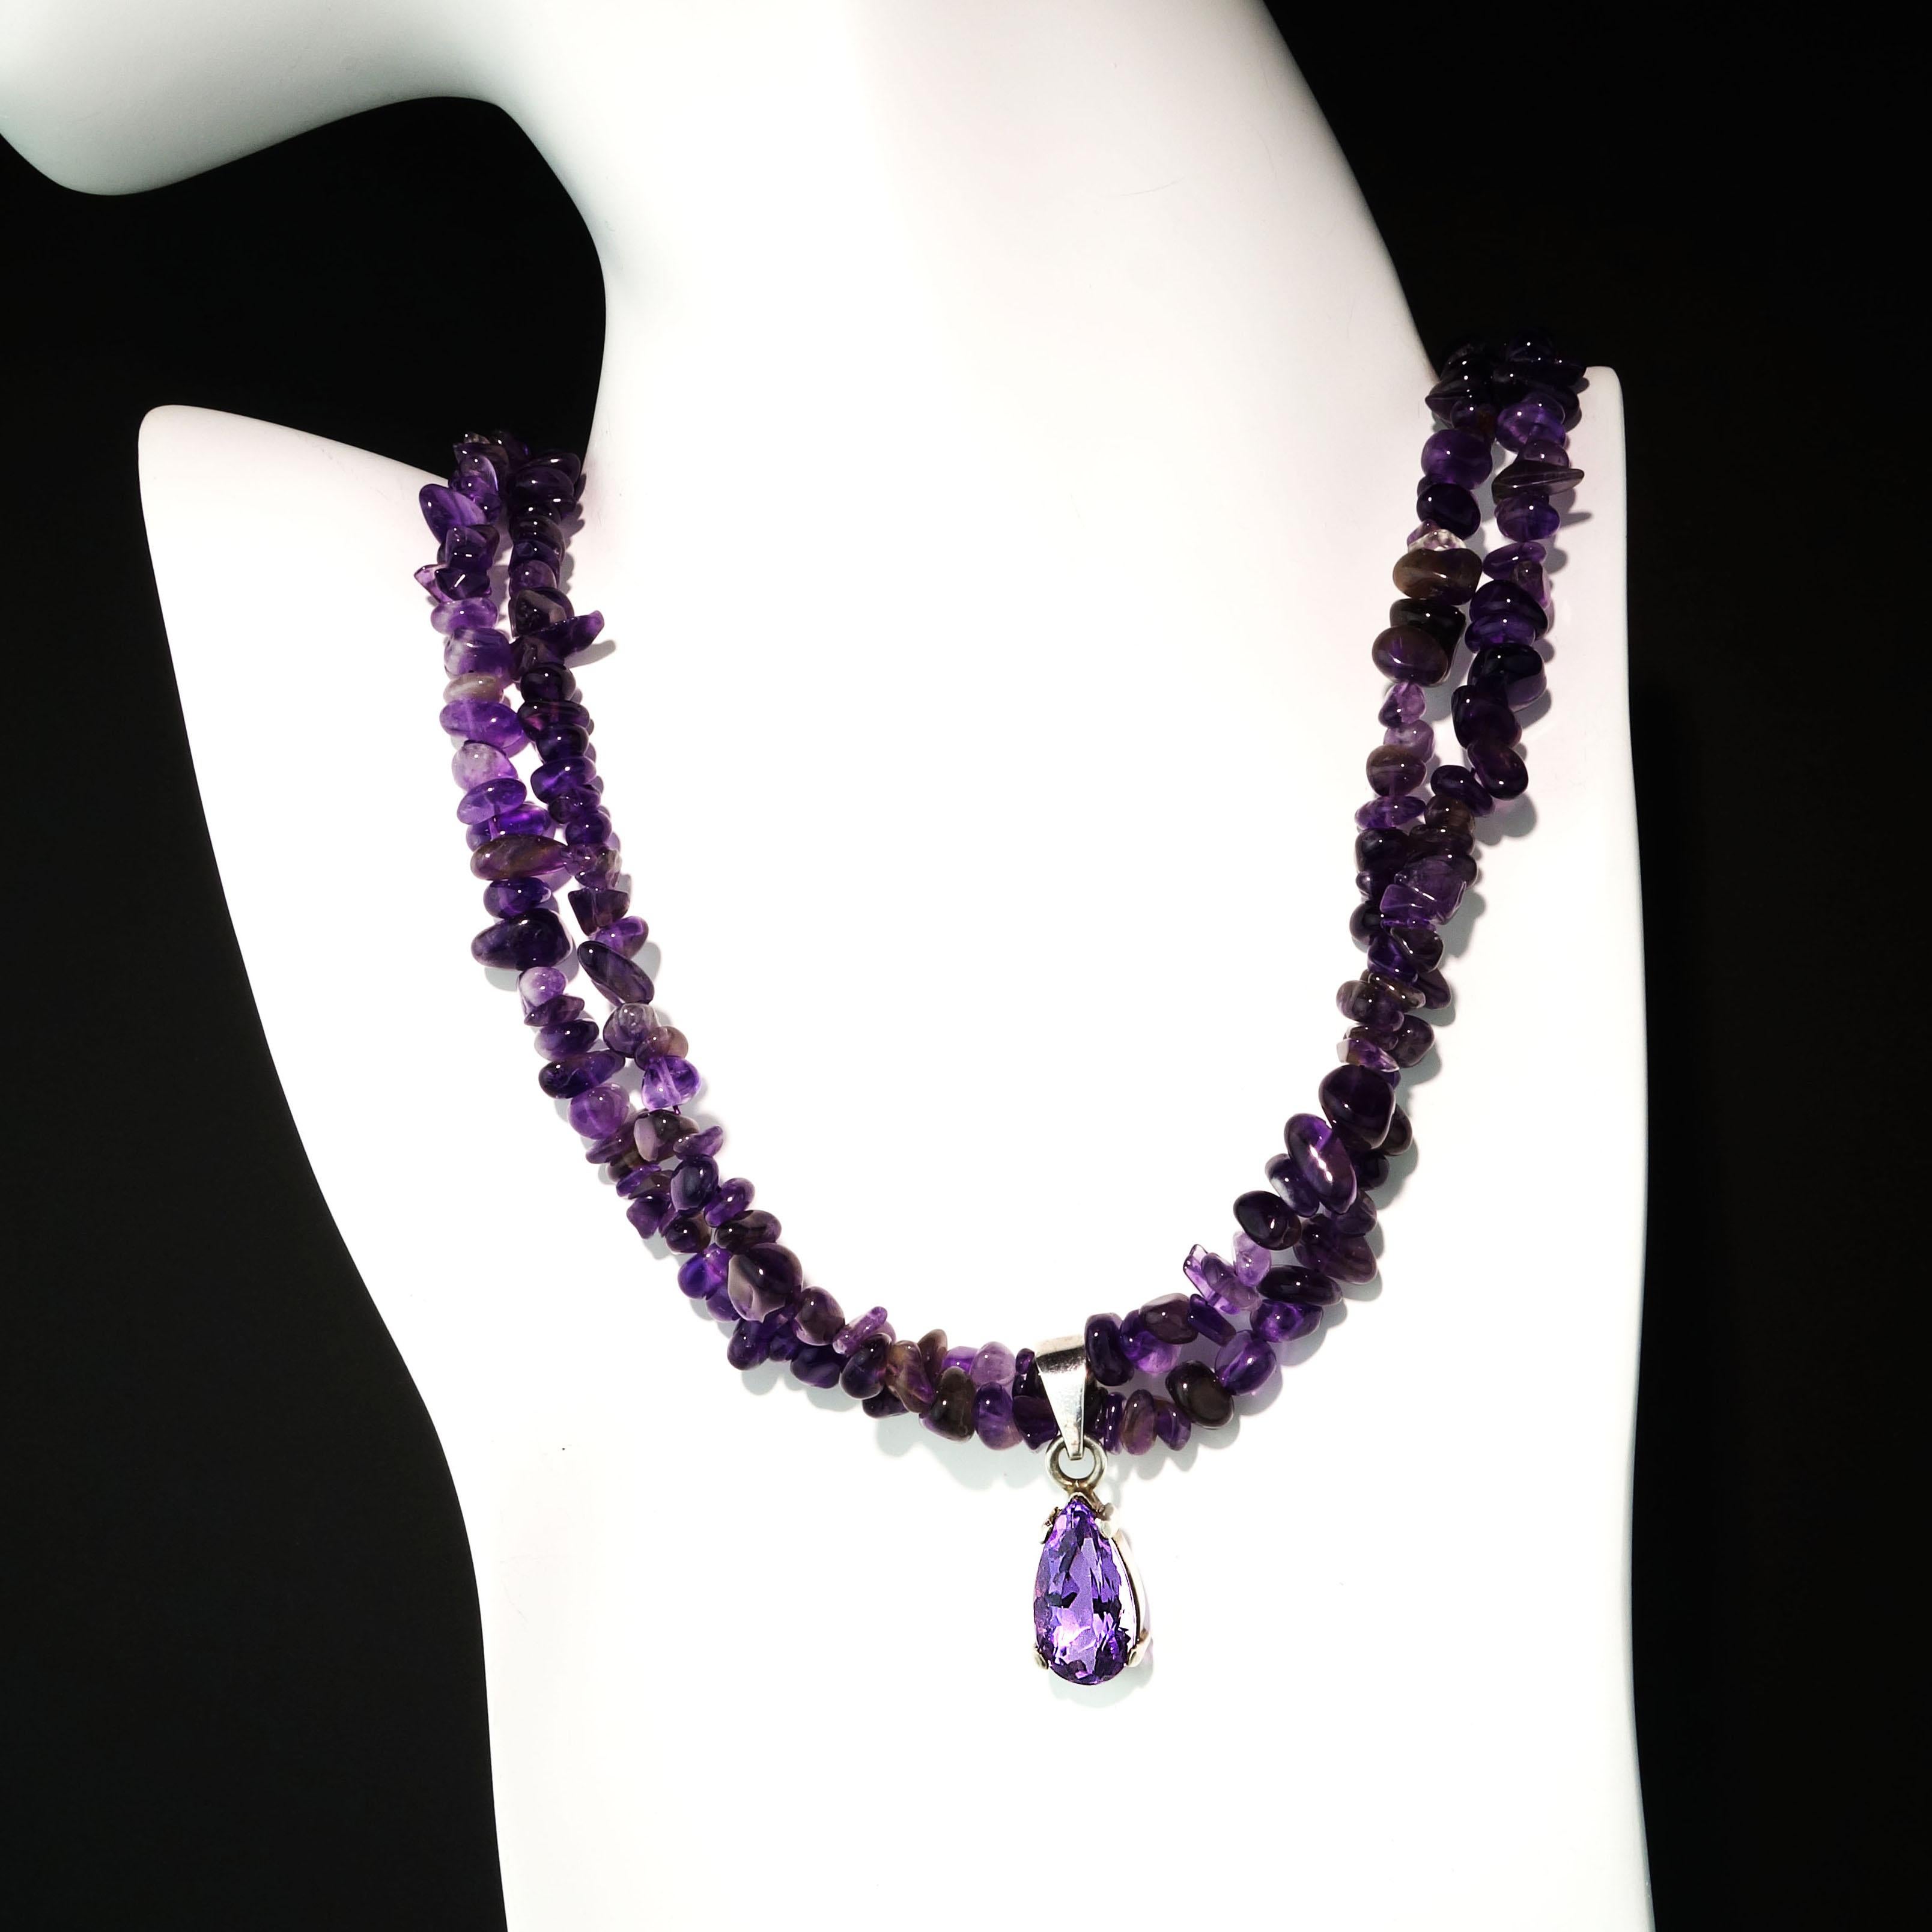 Women's Double Strand Amethyst Necklace with Amethyst Pendant February Birthstone